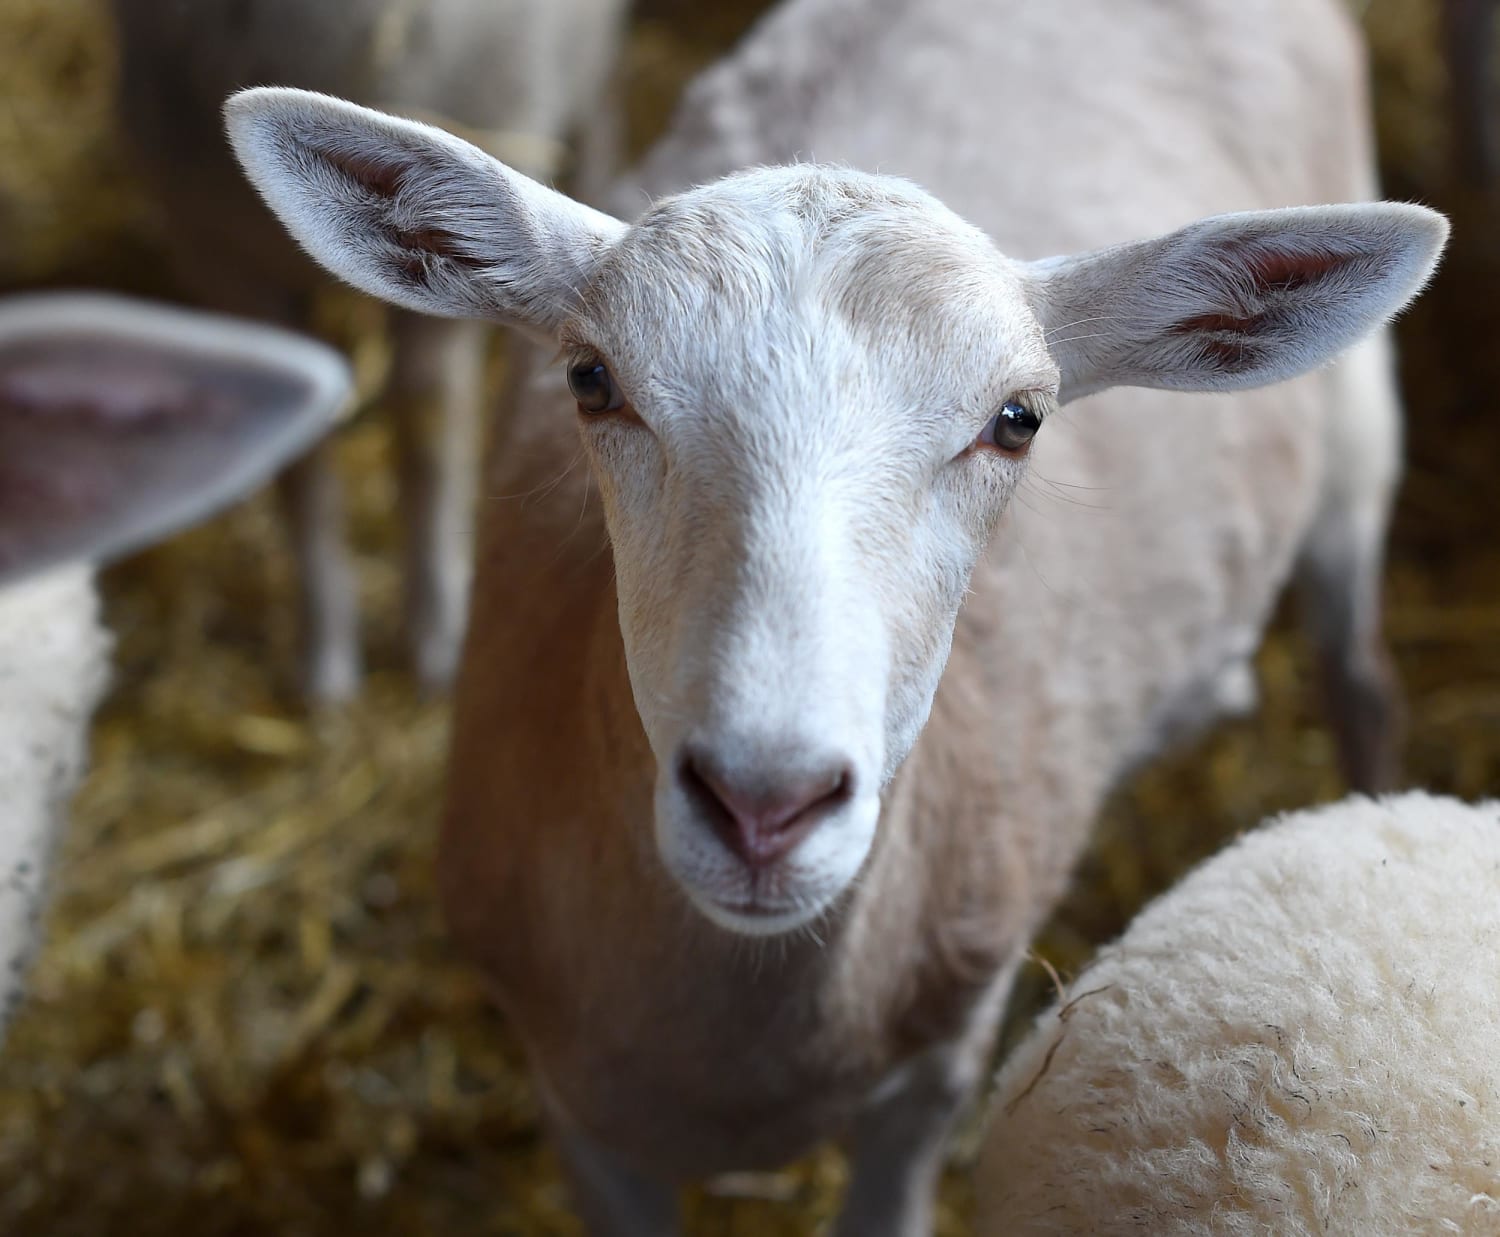 It's a 'Geep'! Rare Sheep-Goat Hybrid Found in Germany